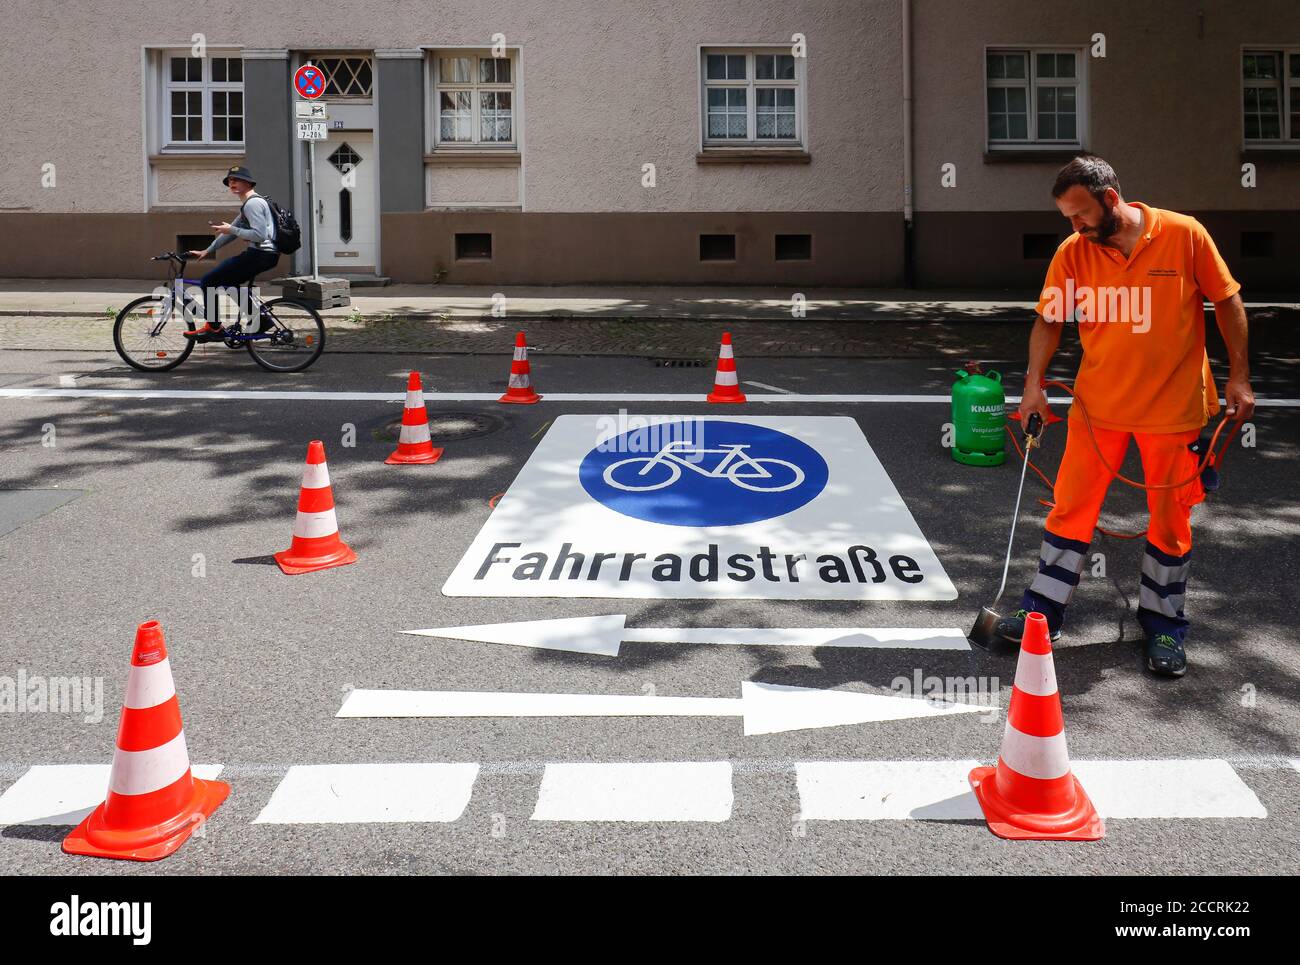 Essen, Ruhr Area, Nordrhein-Westfalen, Germany - new bike street, a lane marker while applying the bicycle pictograms, here in Busehofstrasse in the d Stock Photo